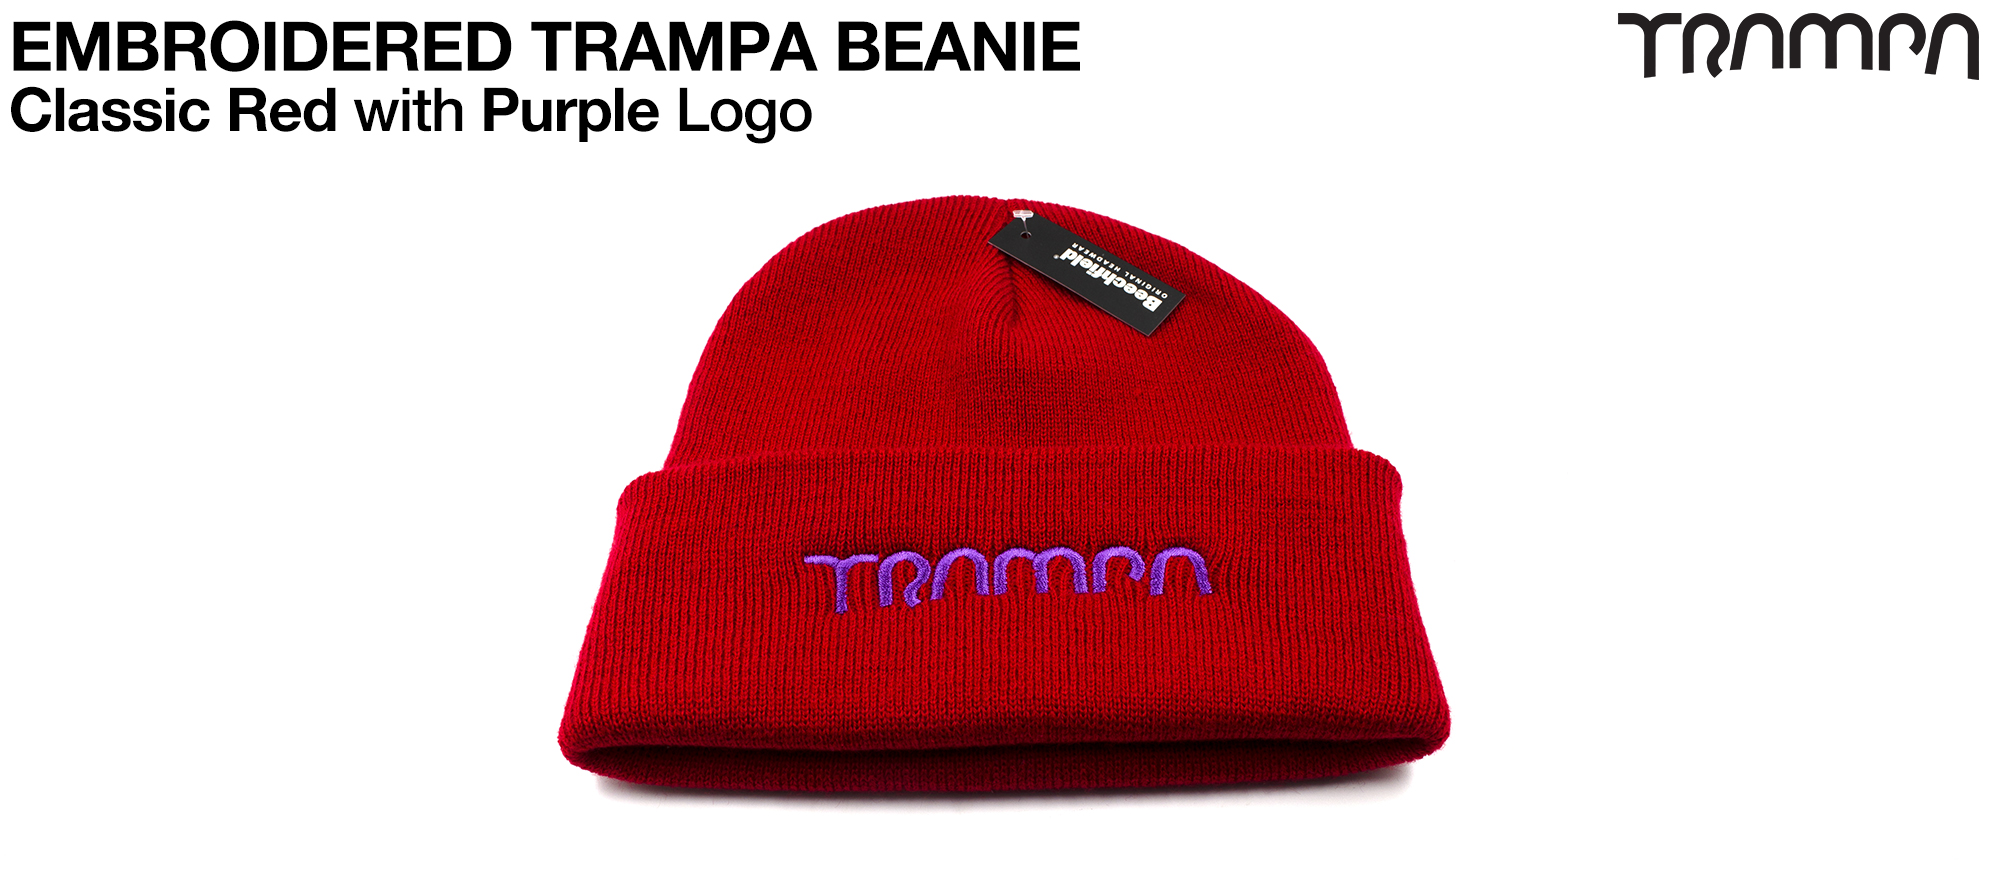 Classic RED Woolly hat with Electric PURPLE embroidered TRAMPA logo - Double thick turn over for extra warmth